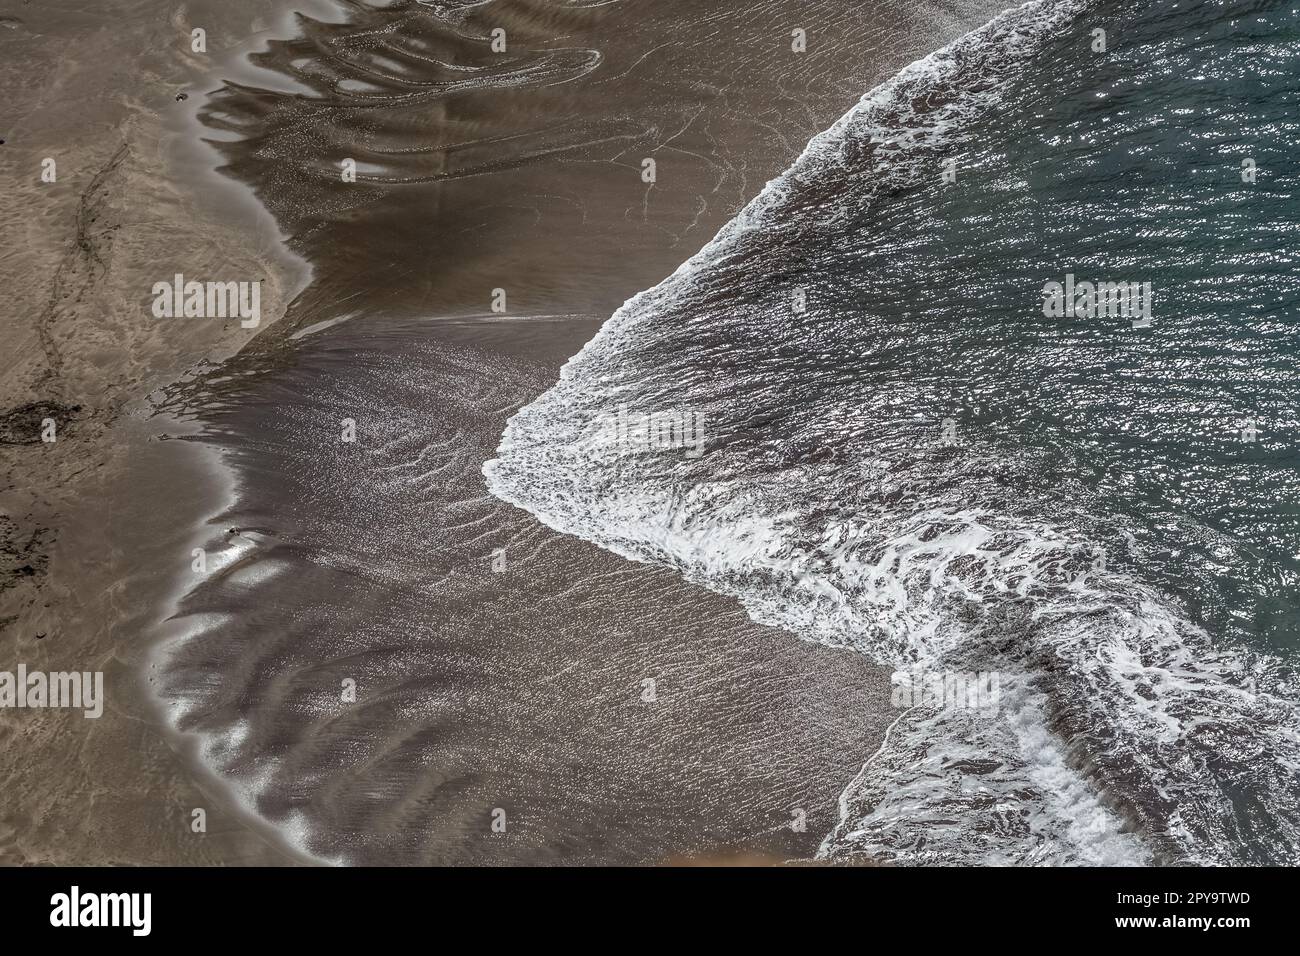 View of the beach with dark sand and the sea water, water with white foam and the effect of the sun reflecting in the water, Madeira Island, Portugal. Stock Photo